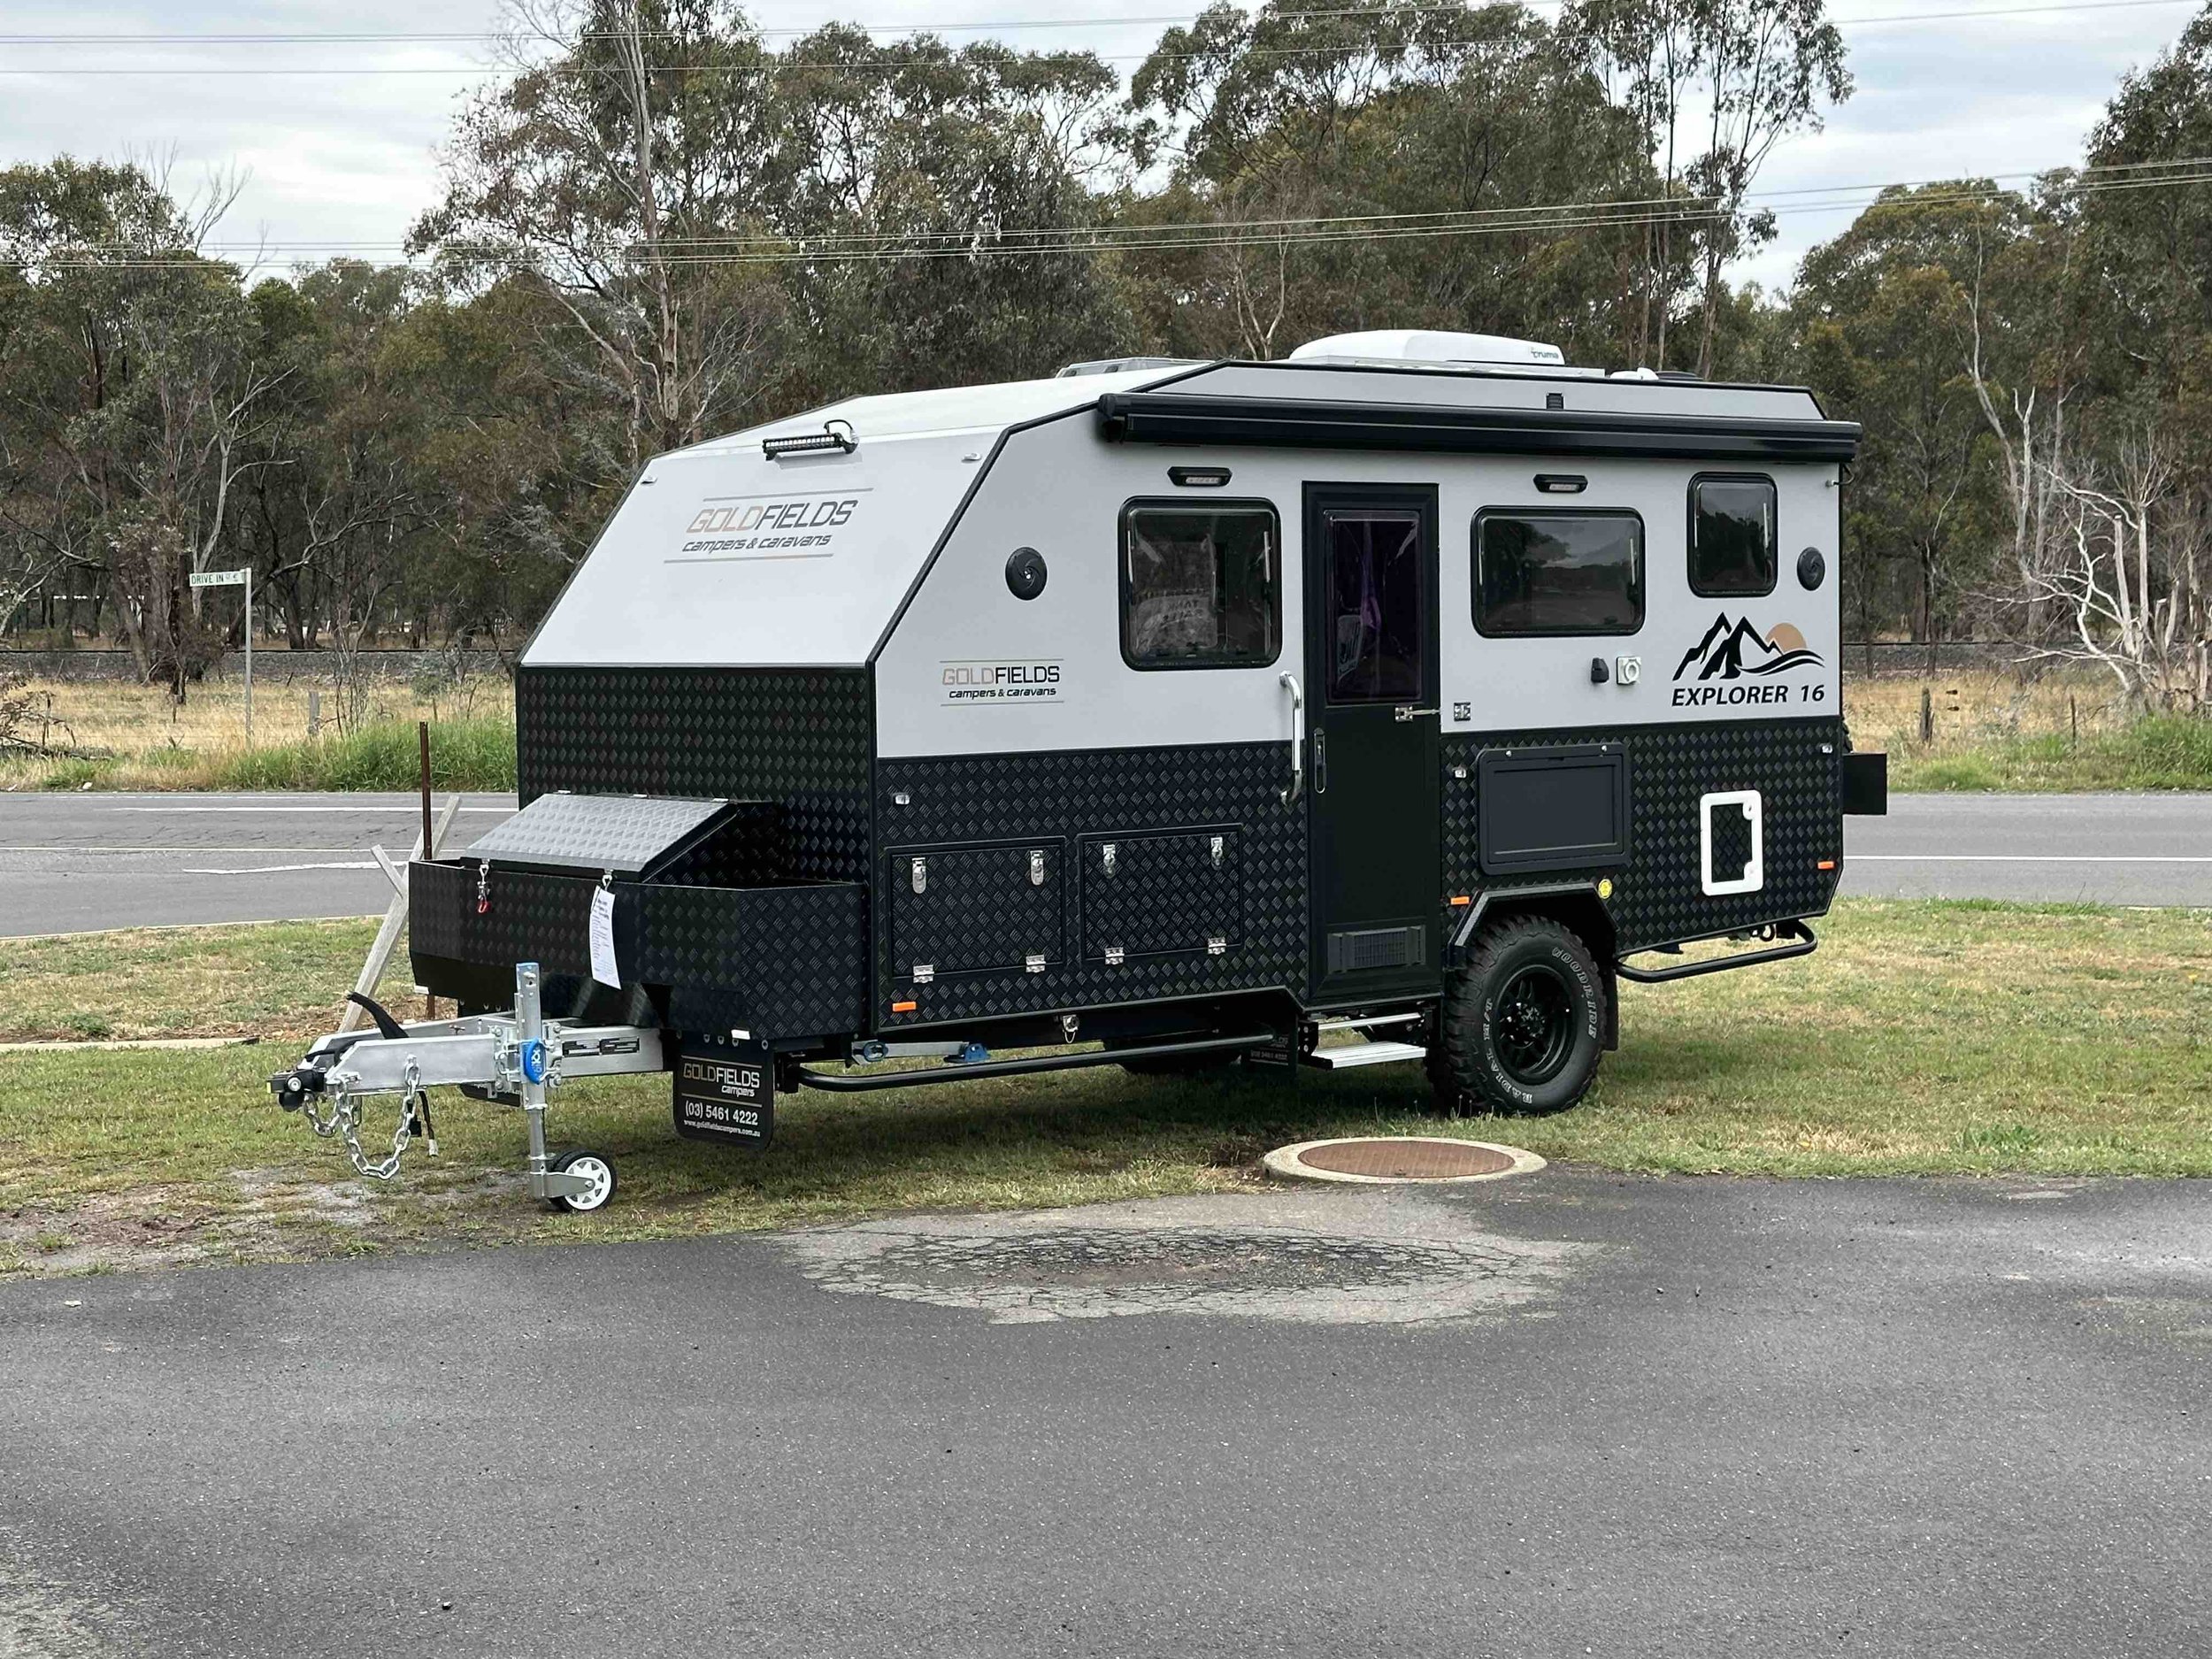 Grab & Go Stock — Goldfields Campers